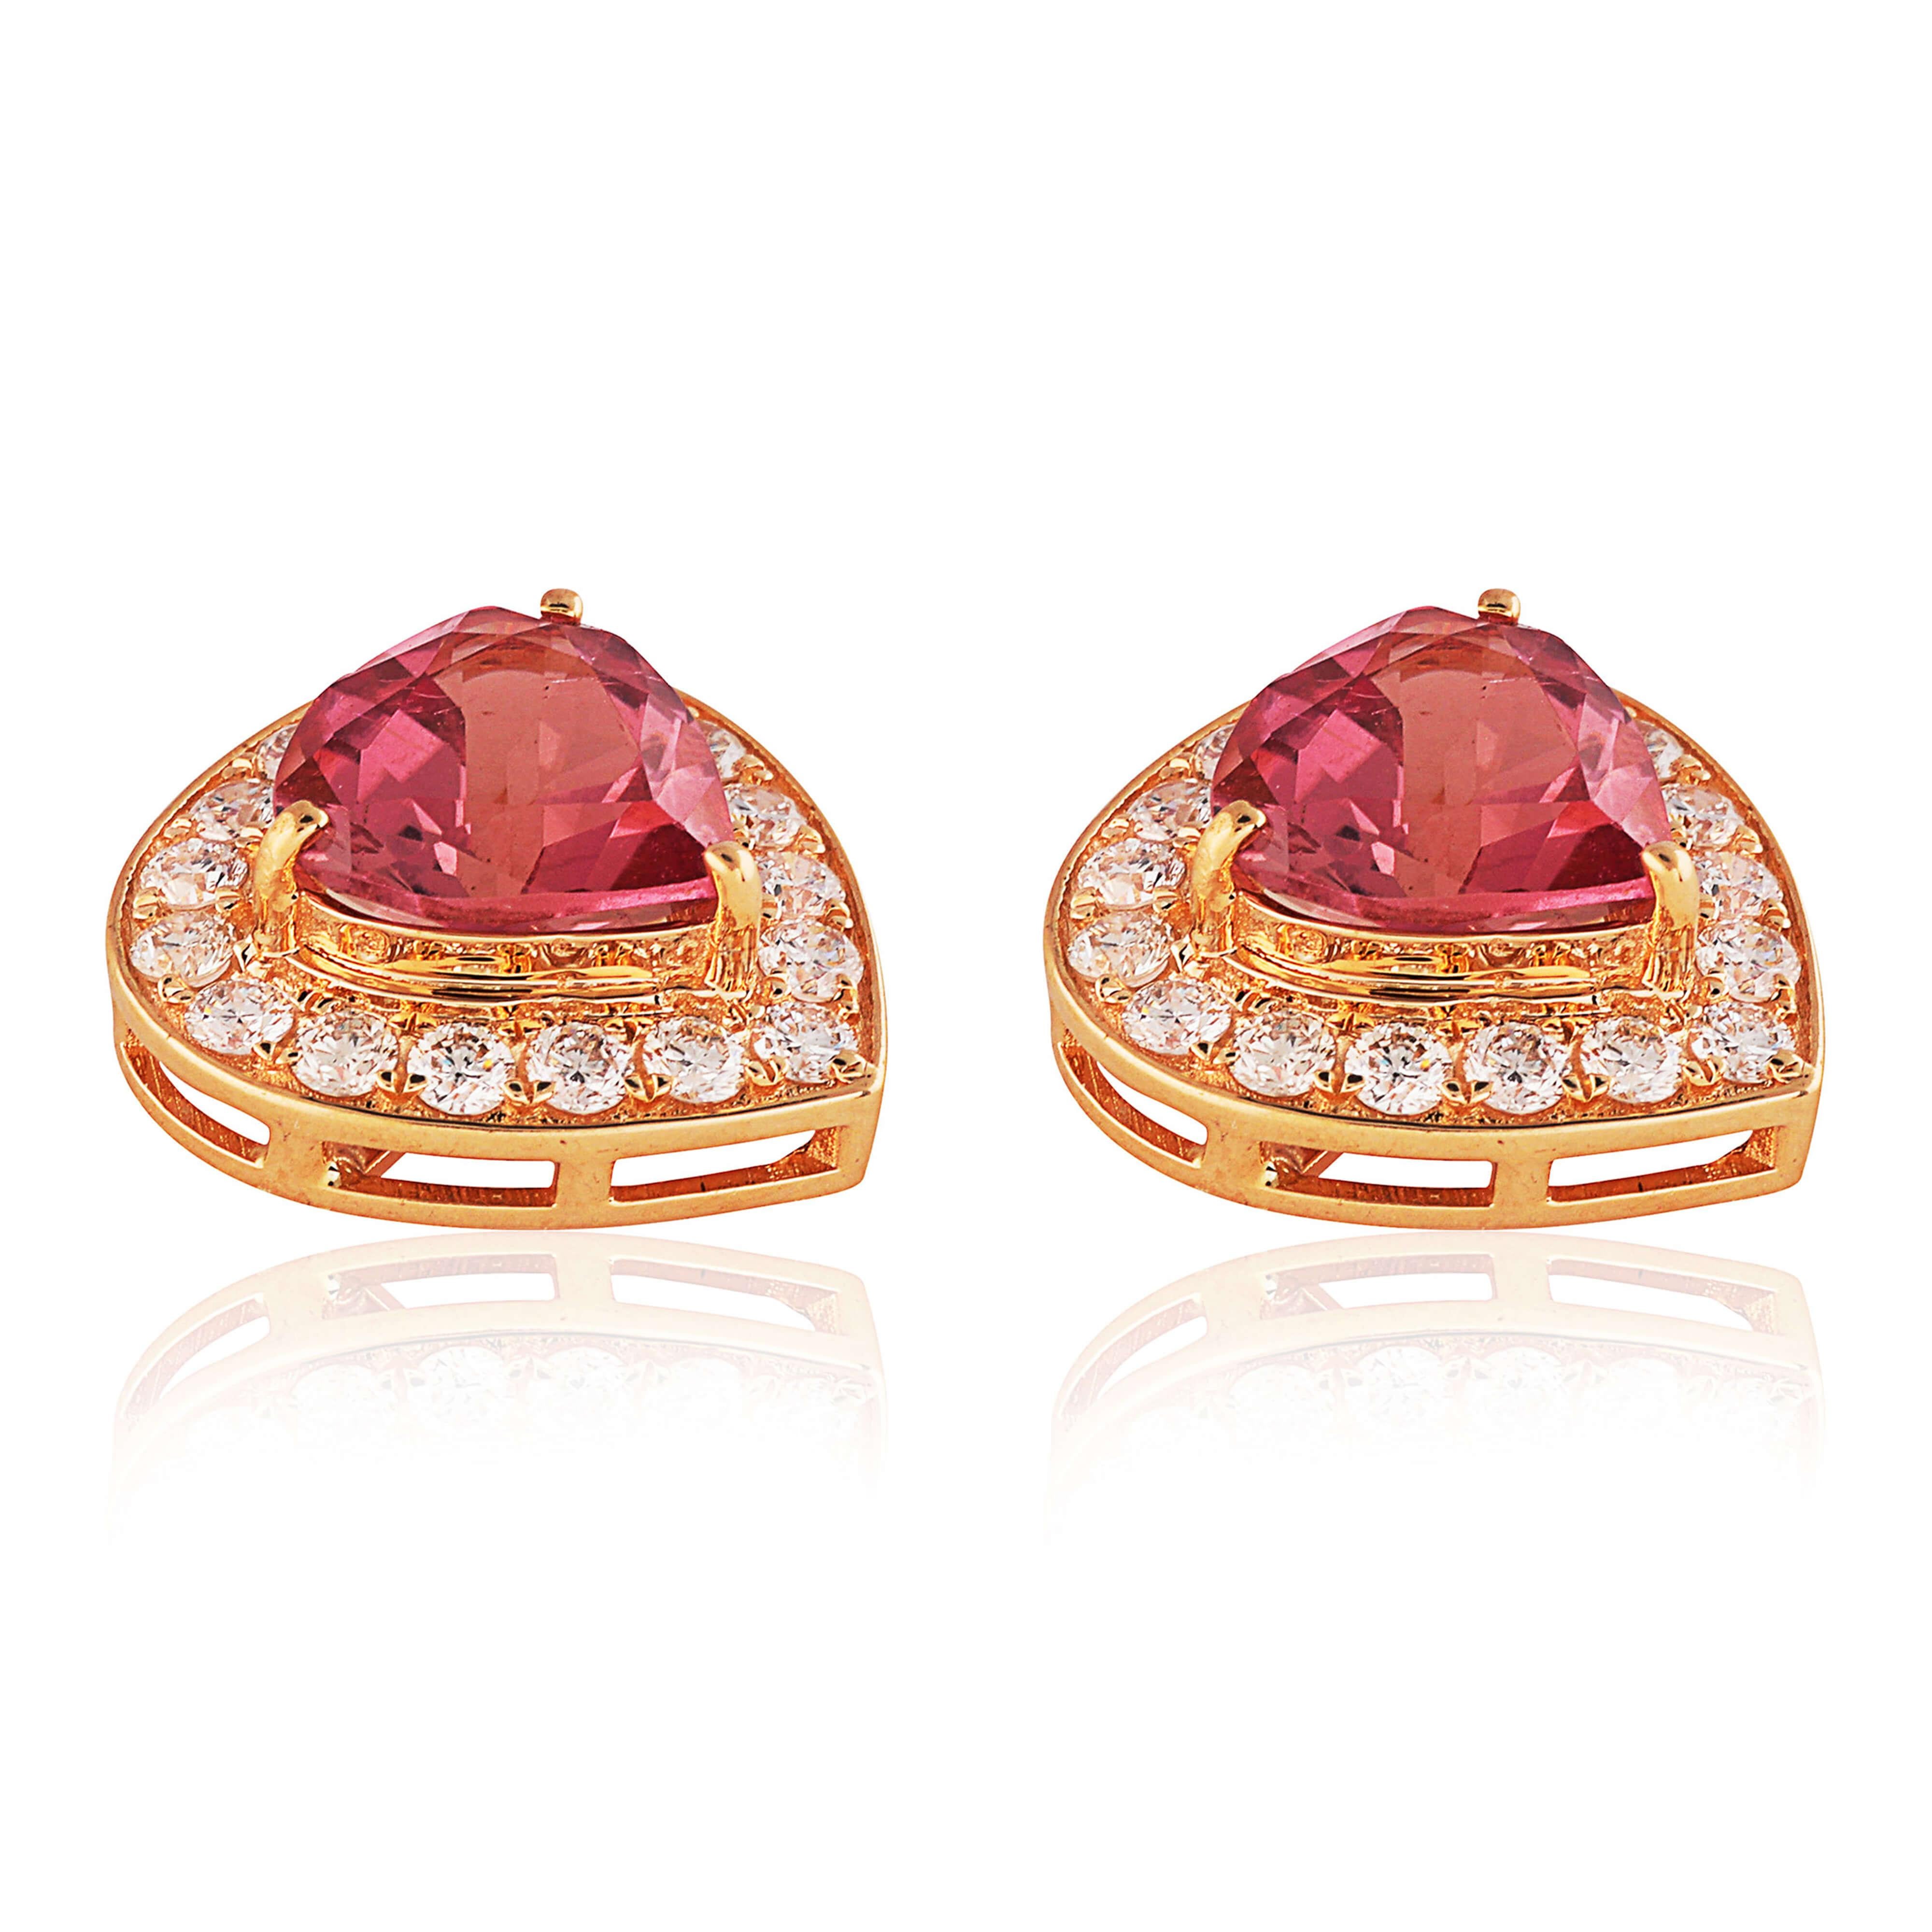 A forever piece of jewellery. A classic, an heirloom. A great (‘can’t go wrong) gift!

Set on 18kt gold with consciously sourced round cut brilliant diamonds and high pink tourmalines.

3.516 grams 18kt gold; 0.53 carat round brilliant cut diamonds;